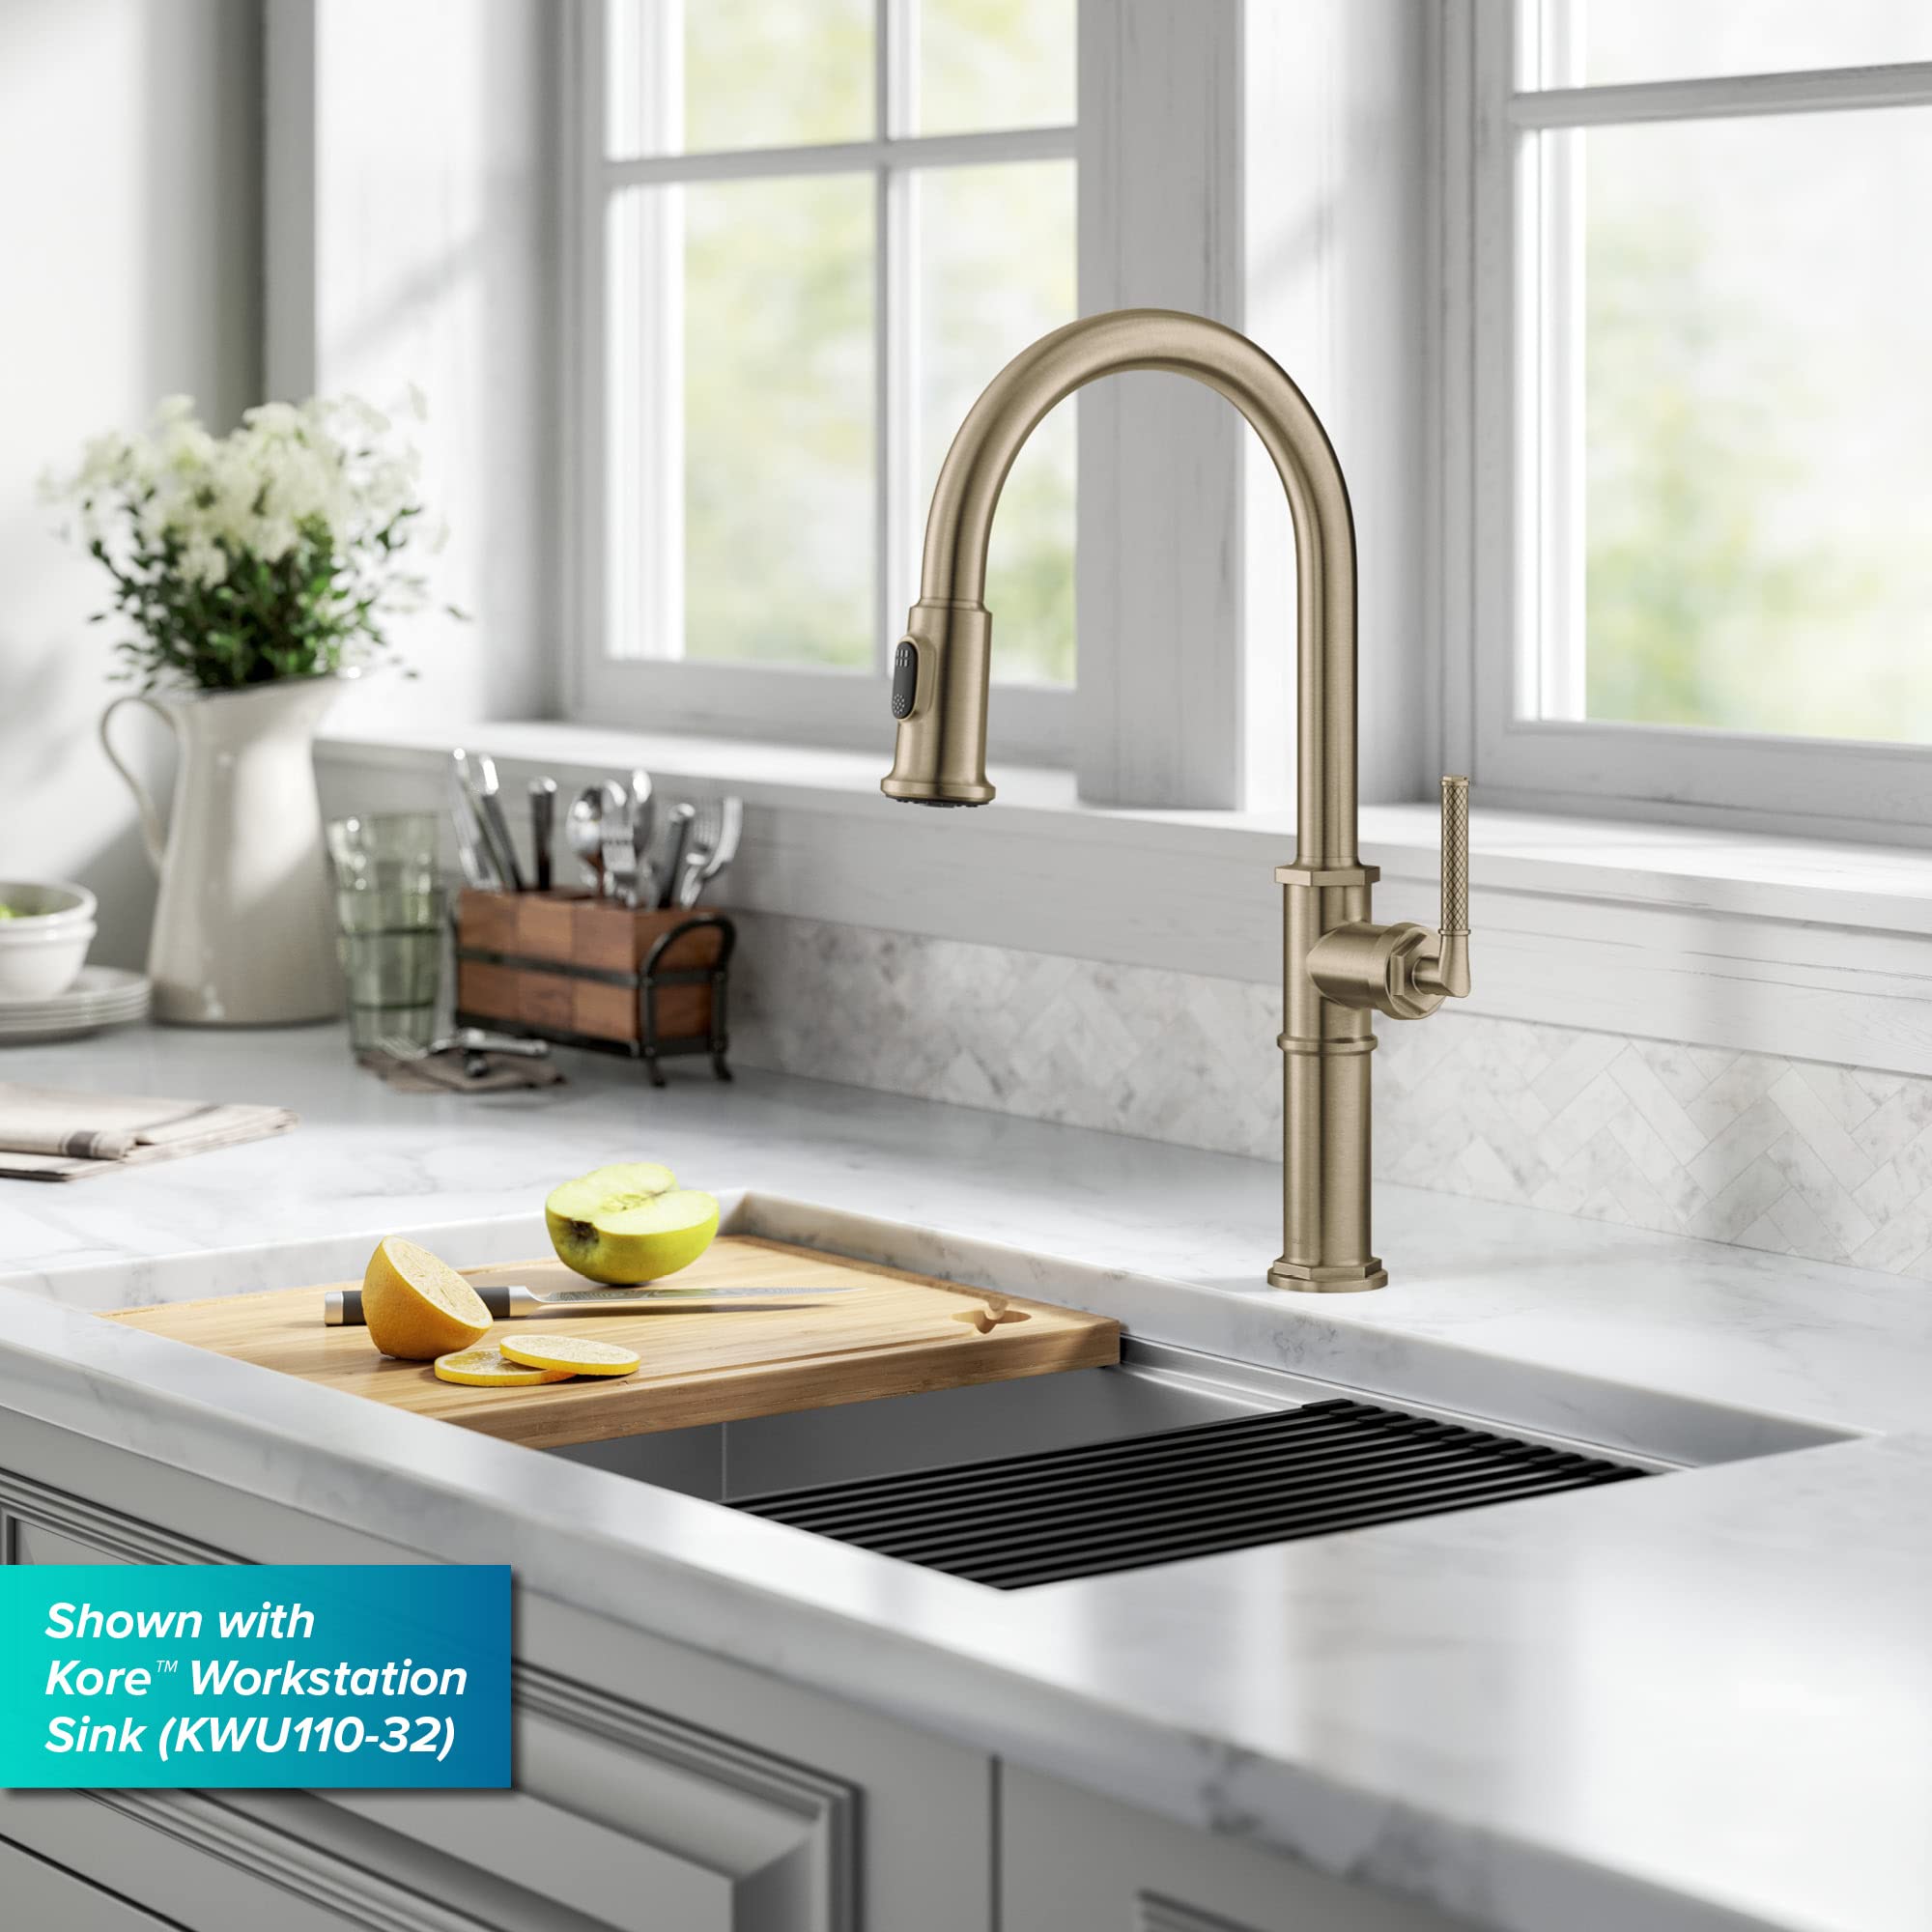 KRAUS® Allyn™ Traditional Industrial Pull-Down Single Handle Kitchen Faucet in Brushed Gold, KPF- 4100BG